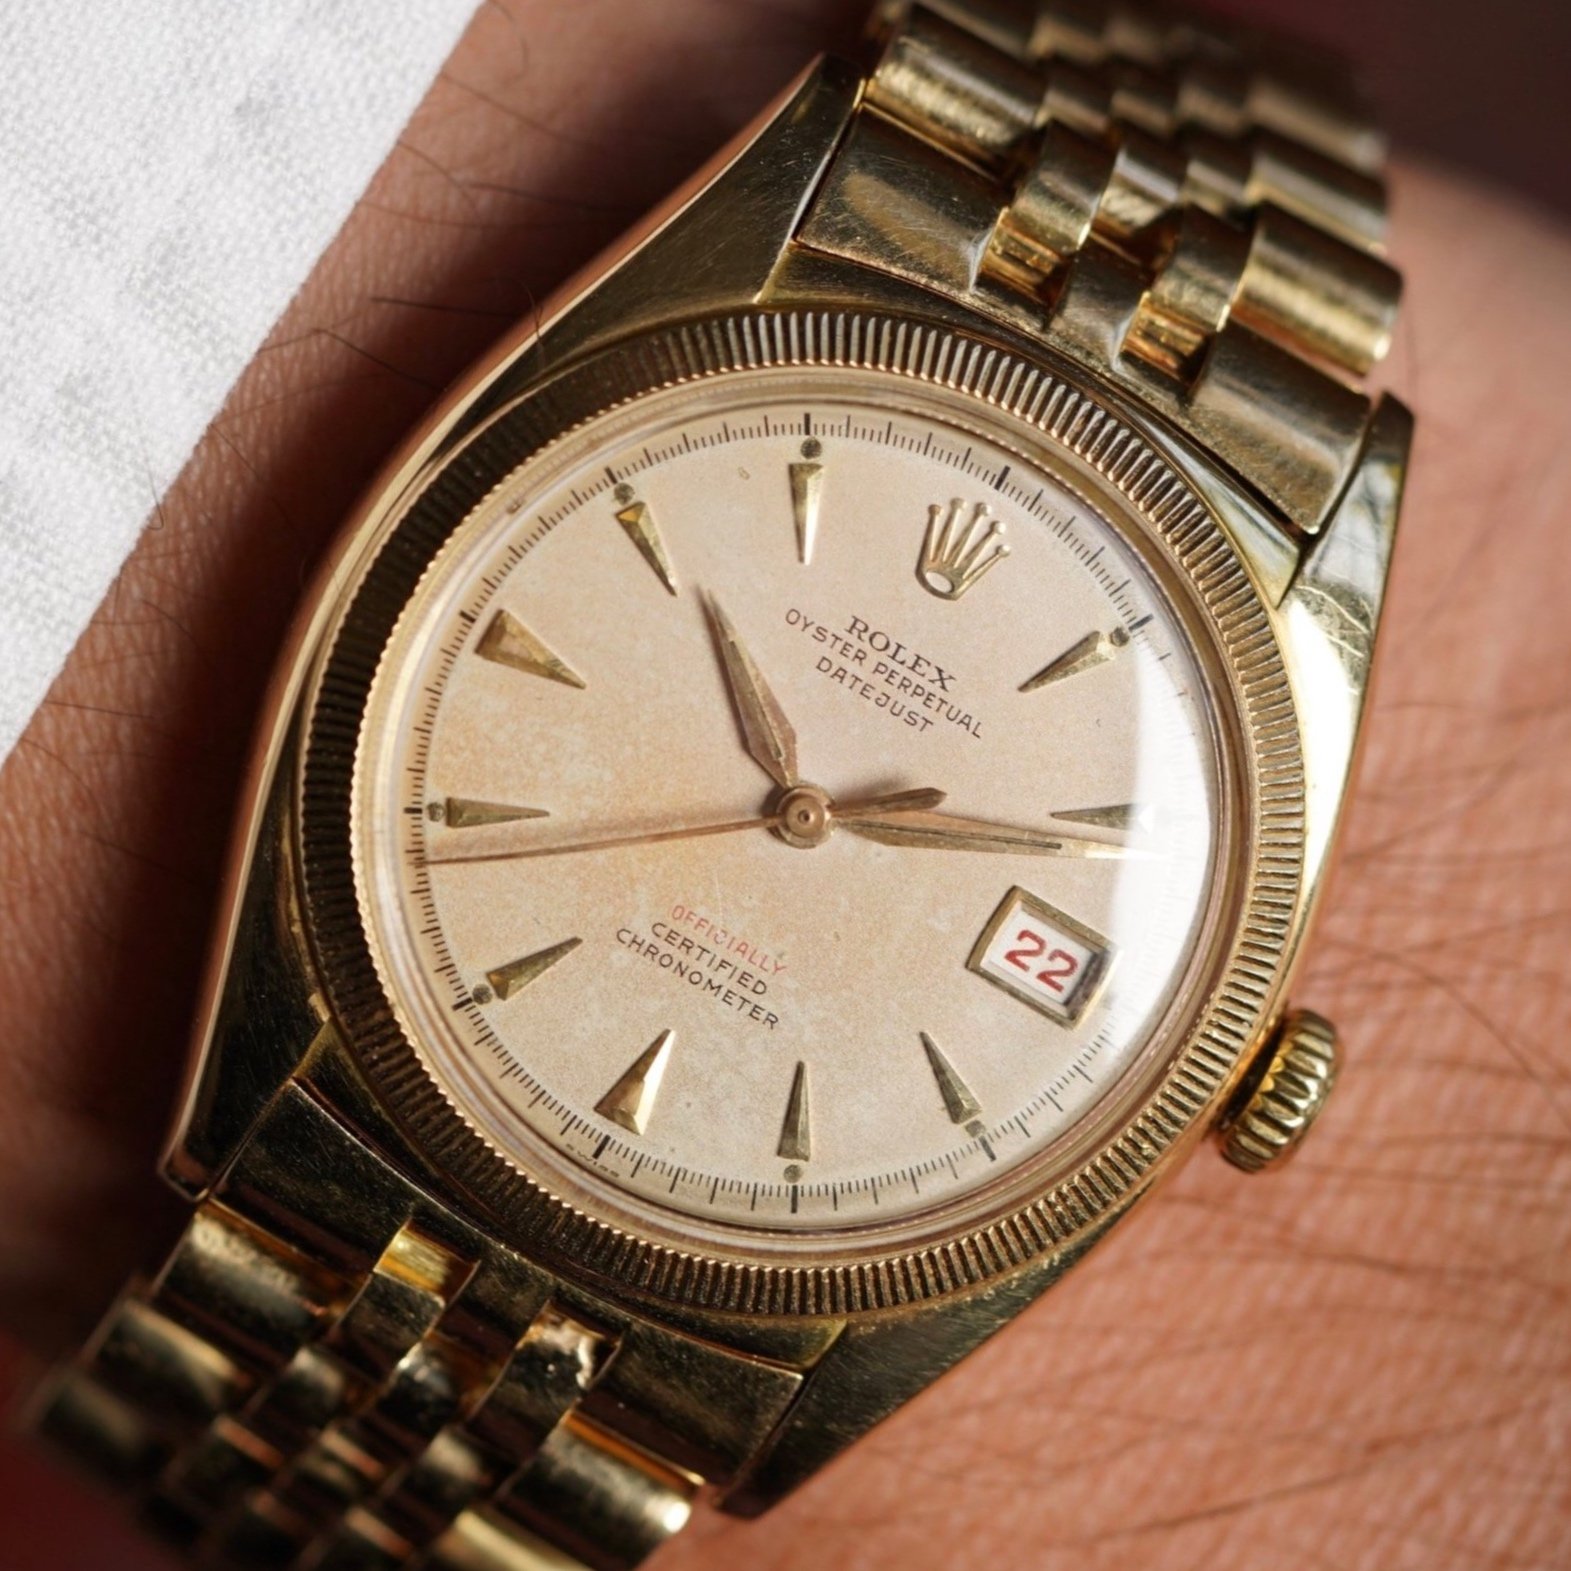 Rolex Datejust Reference 6105 in 18K Yellow Gold w/ Papers